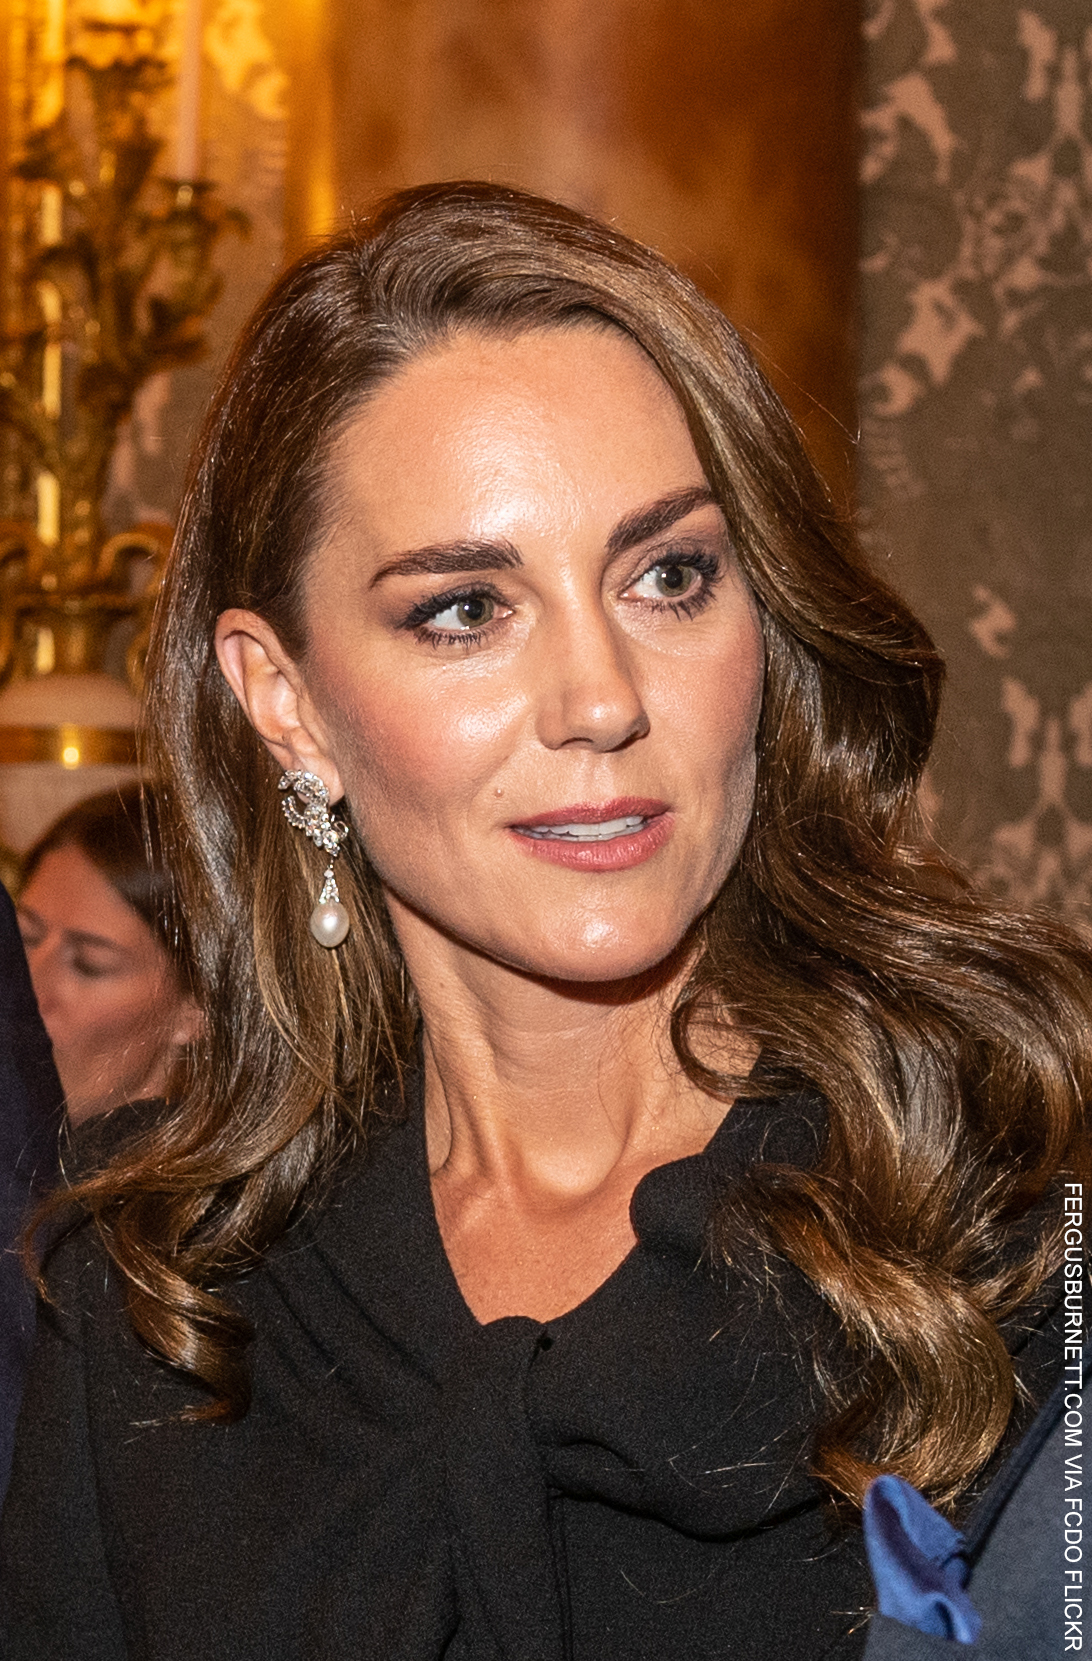 The Duchess of Cambridge wears Princess Dianas pearl and diamond earrings  to the Baftas  and makes them her own